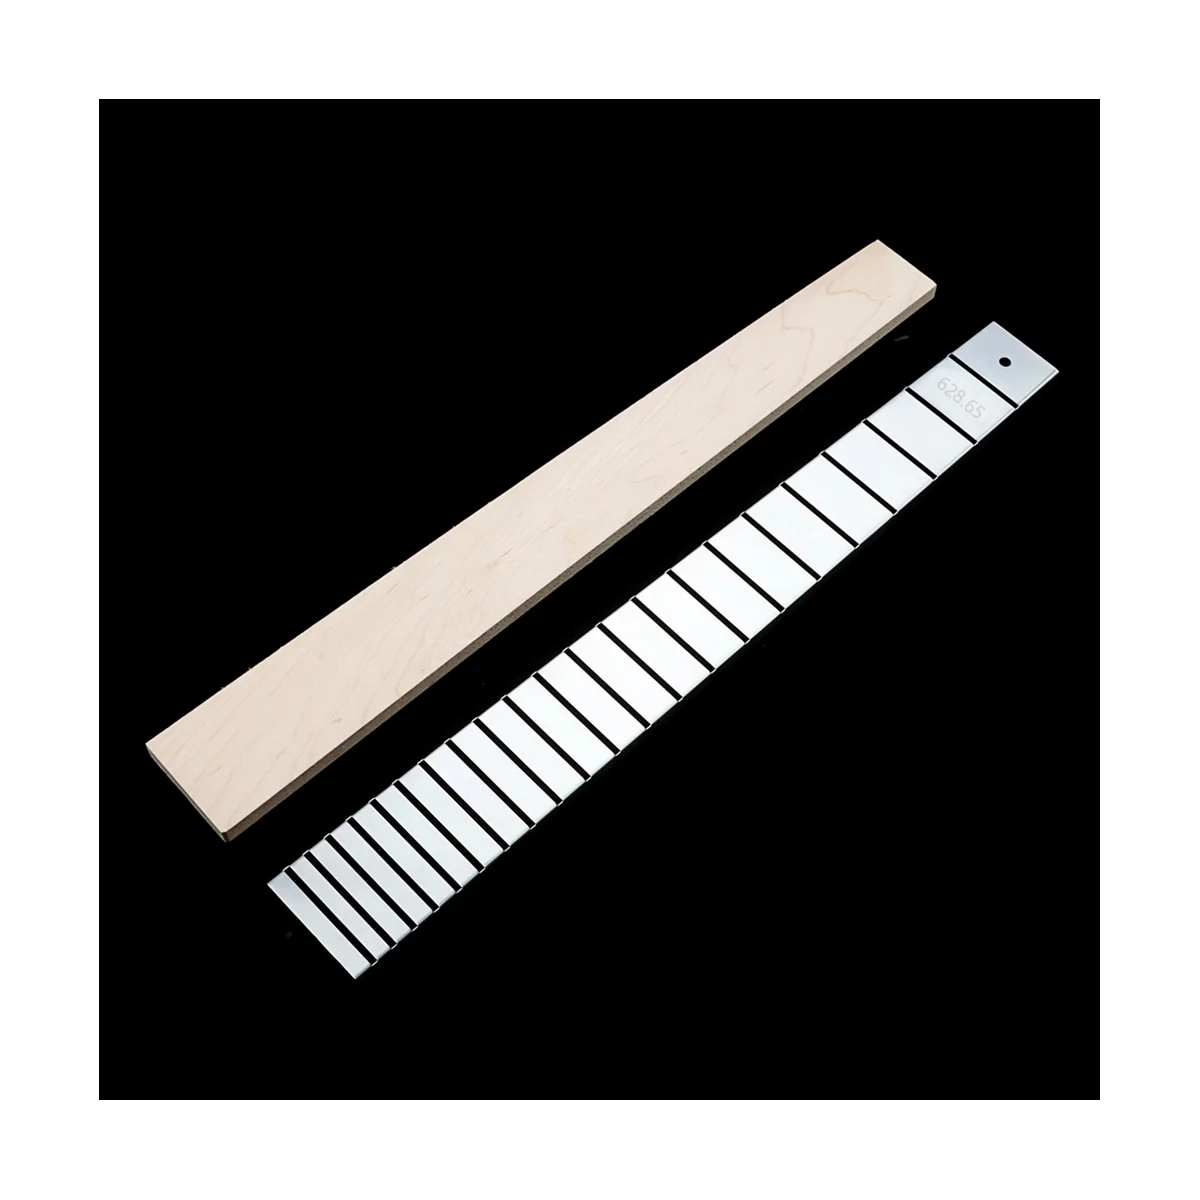 

Guitar Neck Ruler Scale Measuring Fretboard Frets Tool for LP 22 Fret 24.75 Inch Electric Guitar Neck Accessories